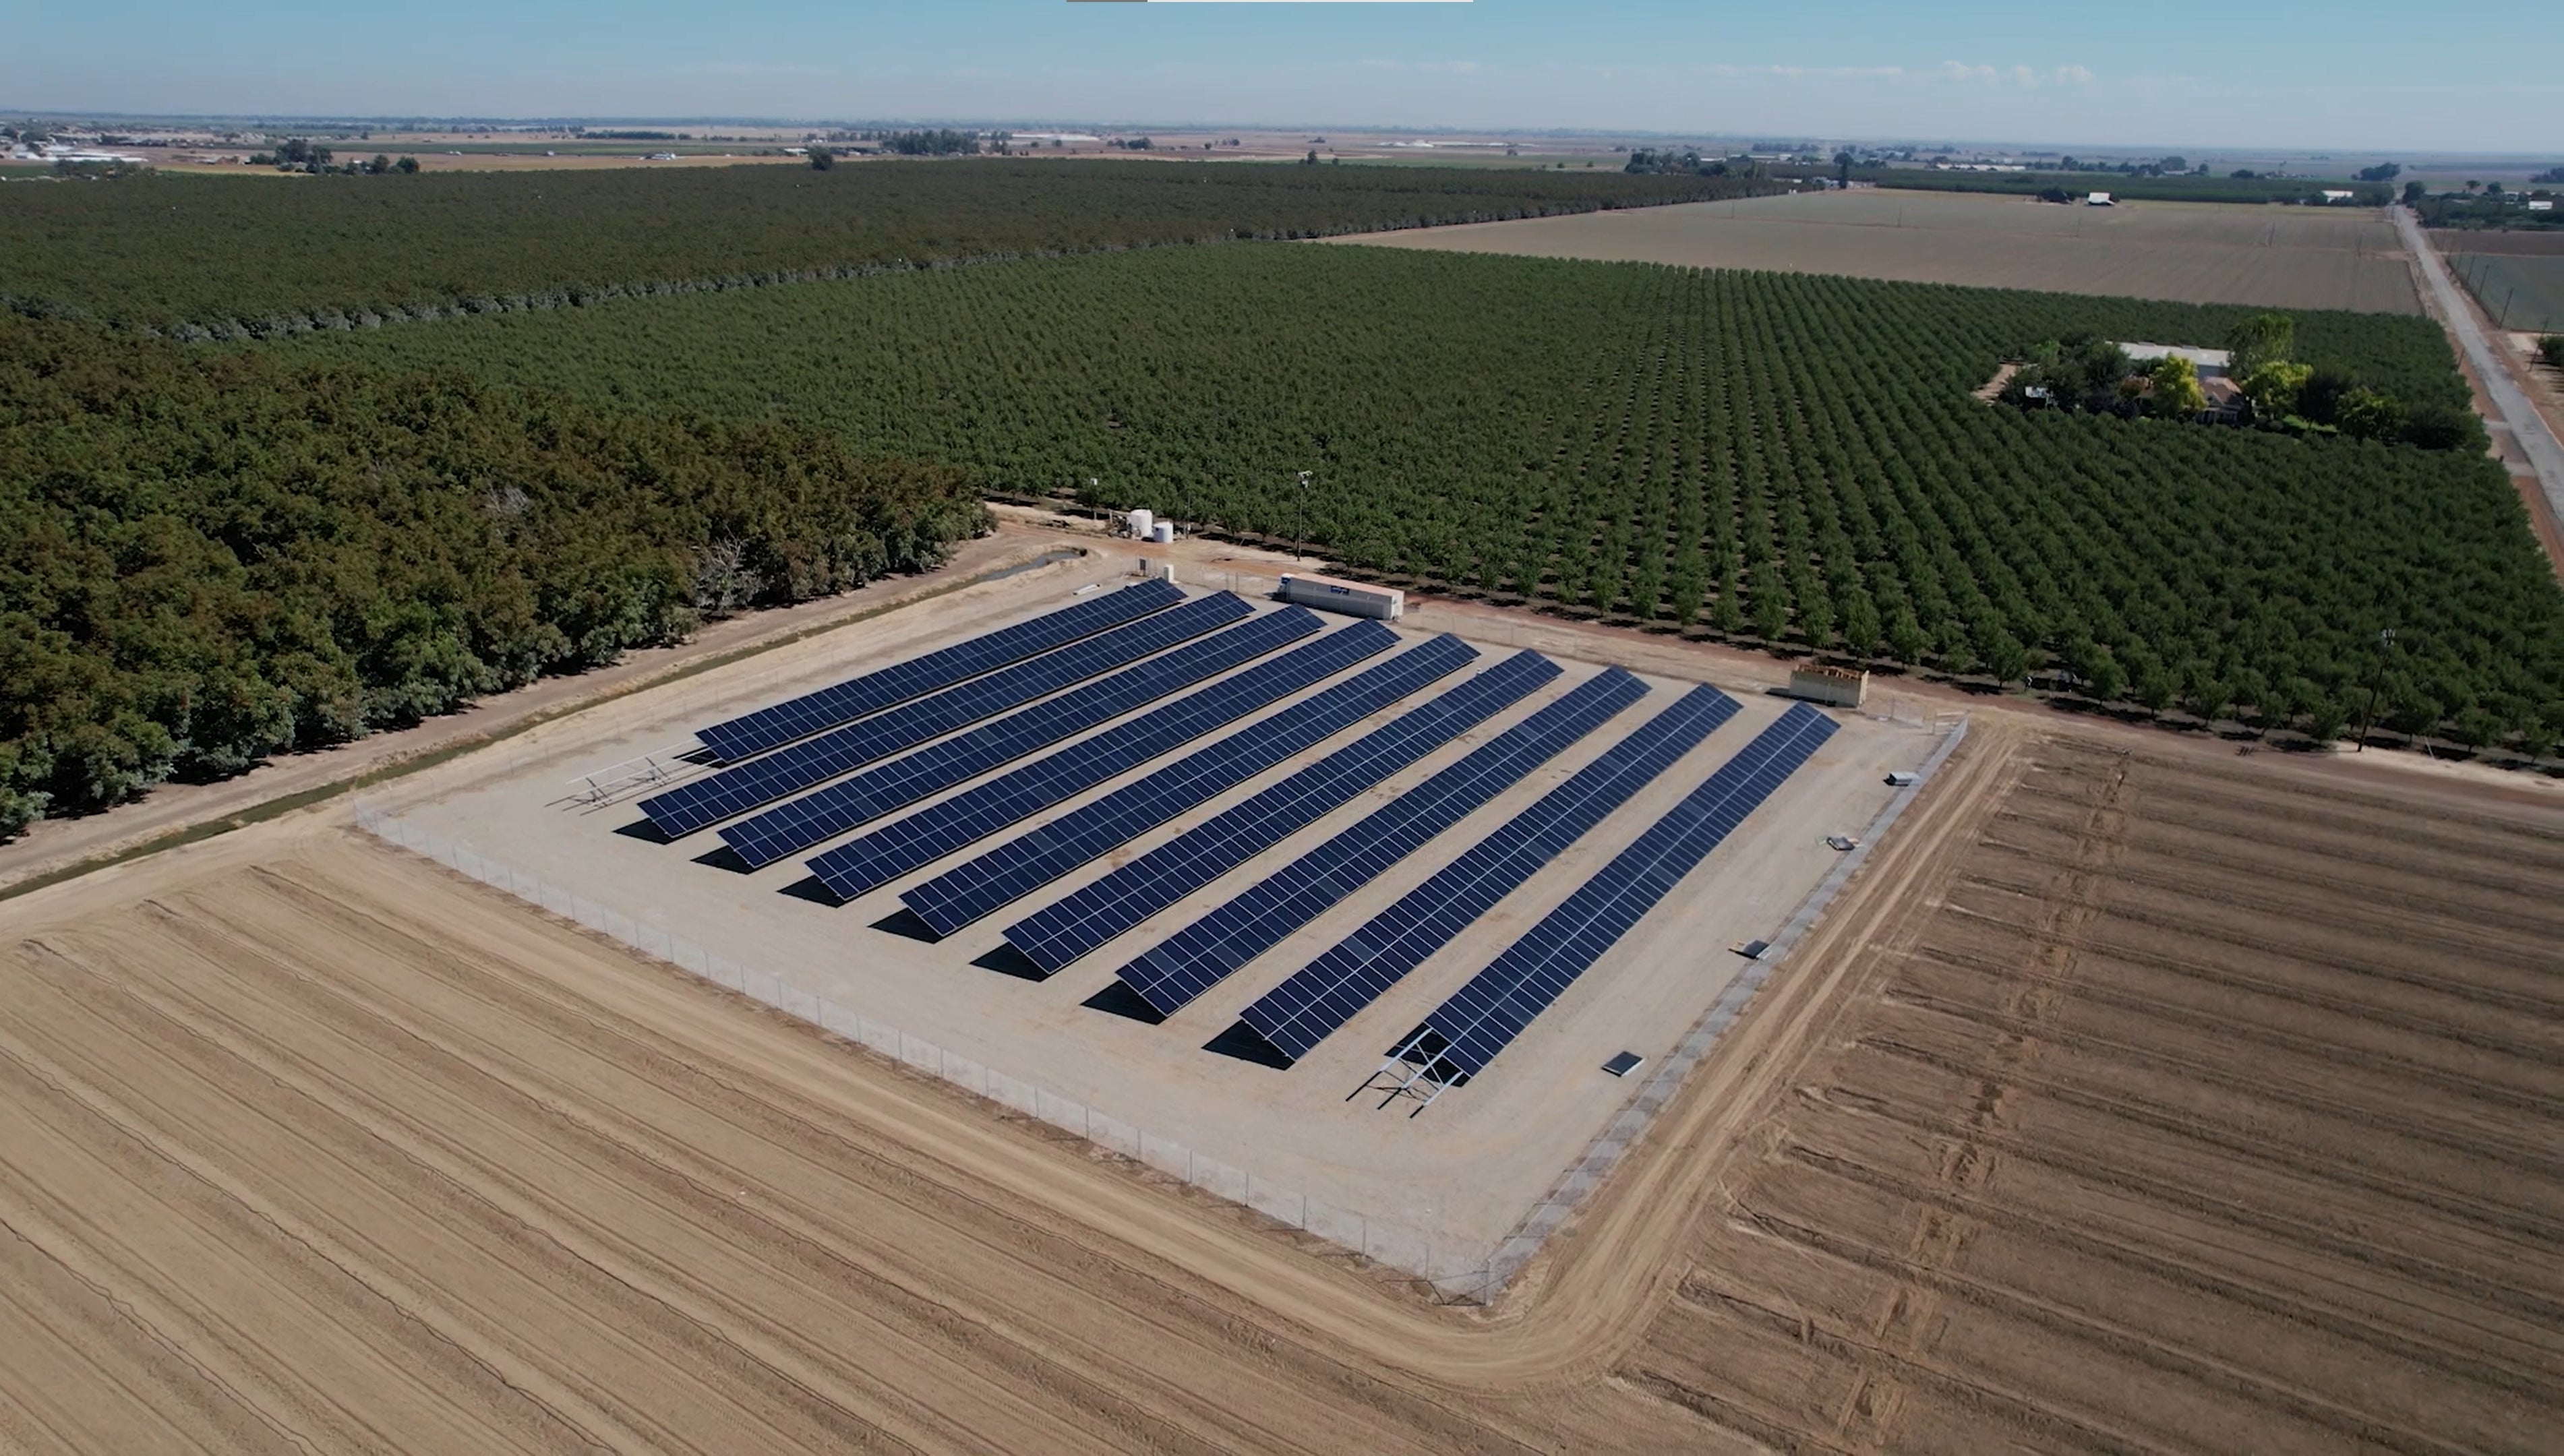 Solar installation in a field surrounded by orchards